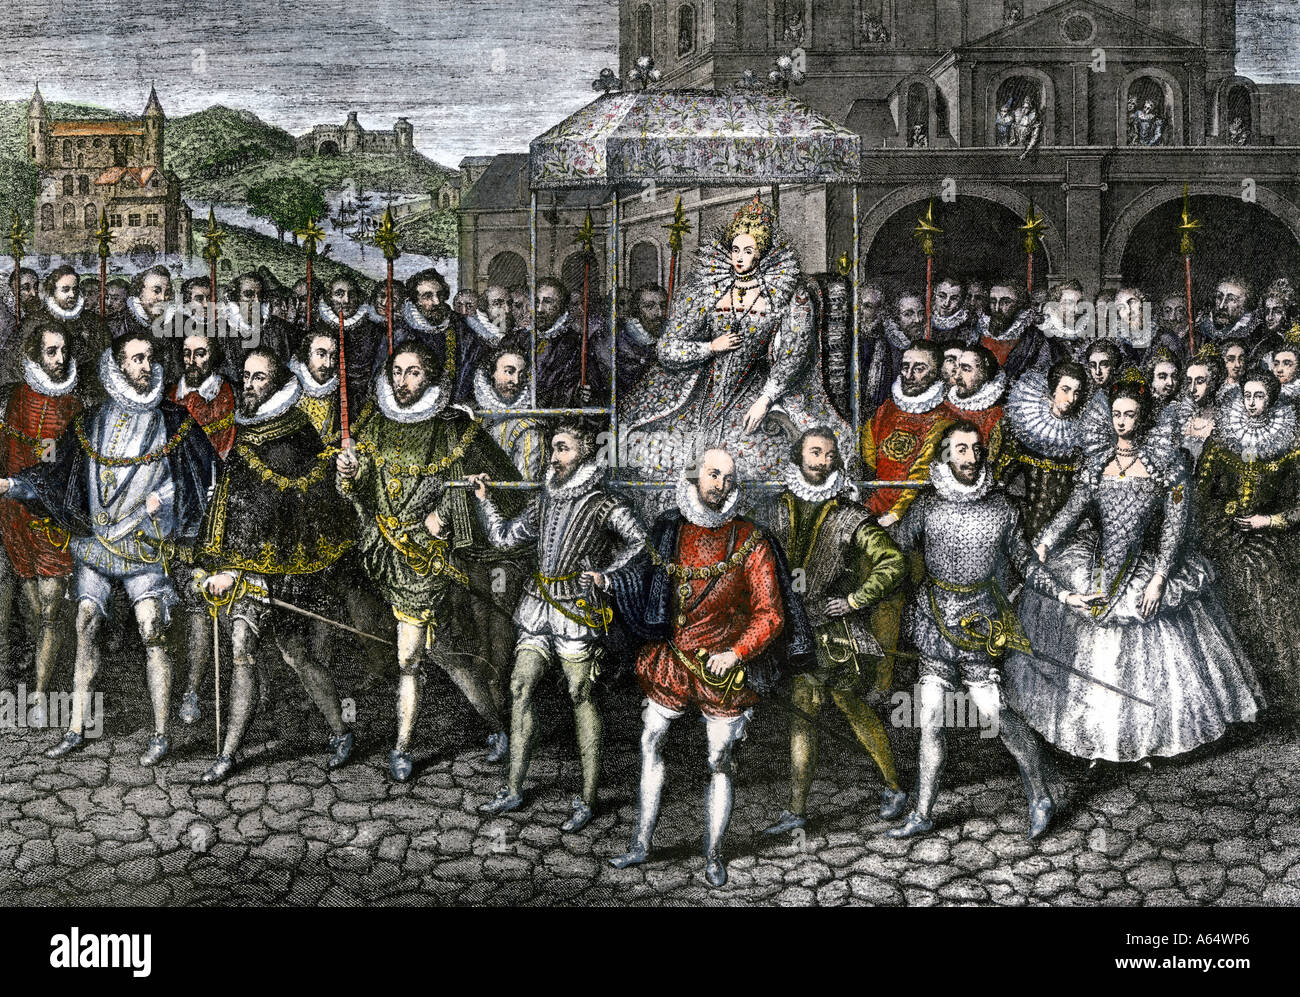 Visit of Queen Elizabeth I to Blackfriars in London 1600. Hand-colored woodcut Stock Photo